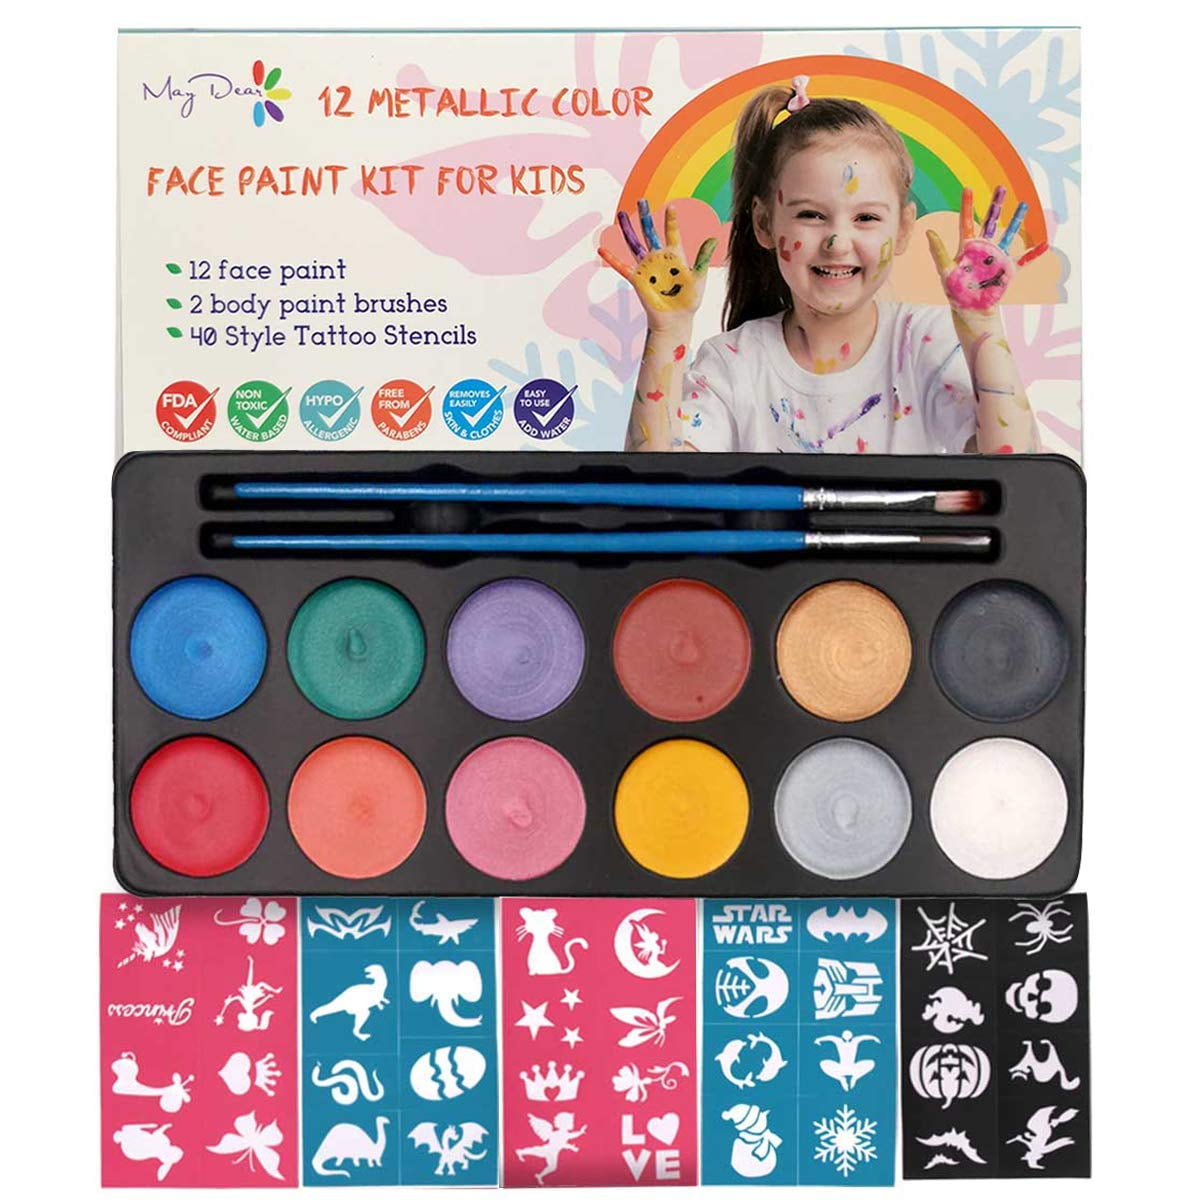 Face Paint Kit for Kids, 19 Large Water Based Paints, Halloween Makeup Kit